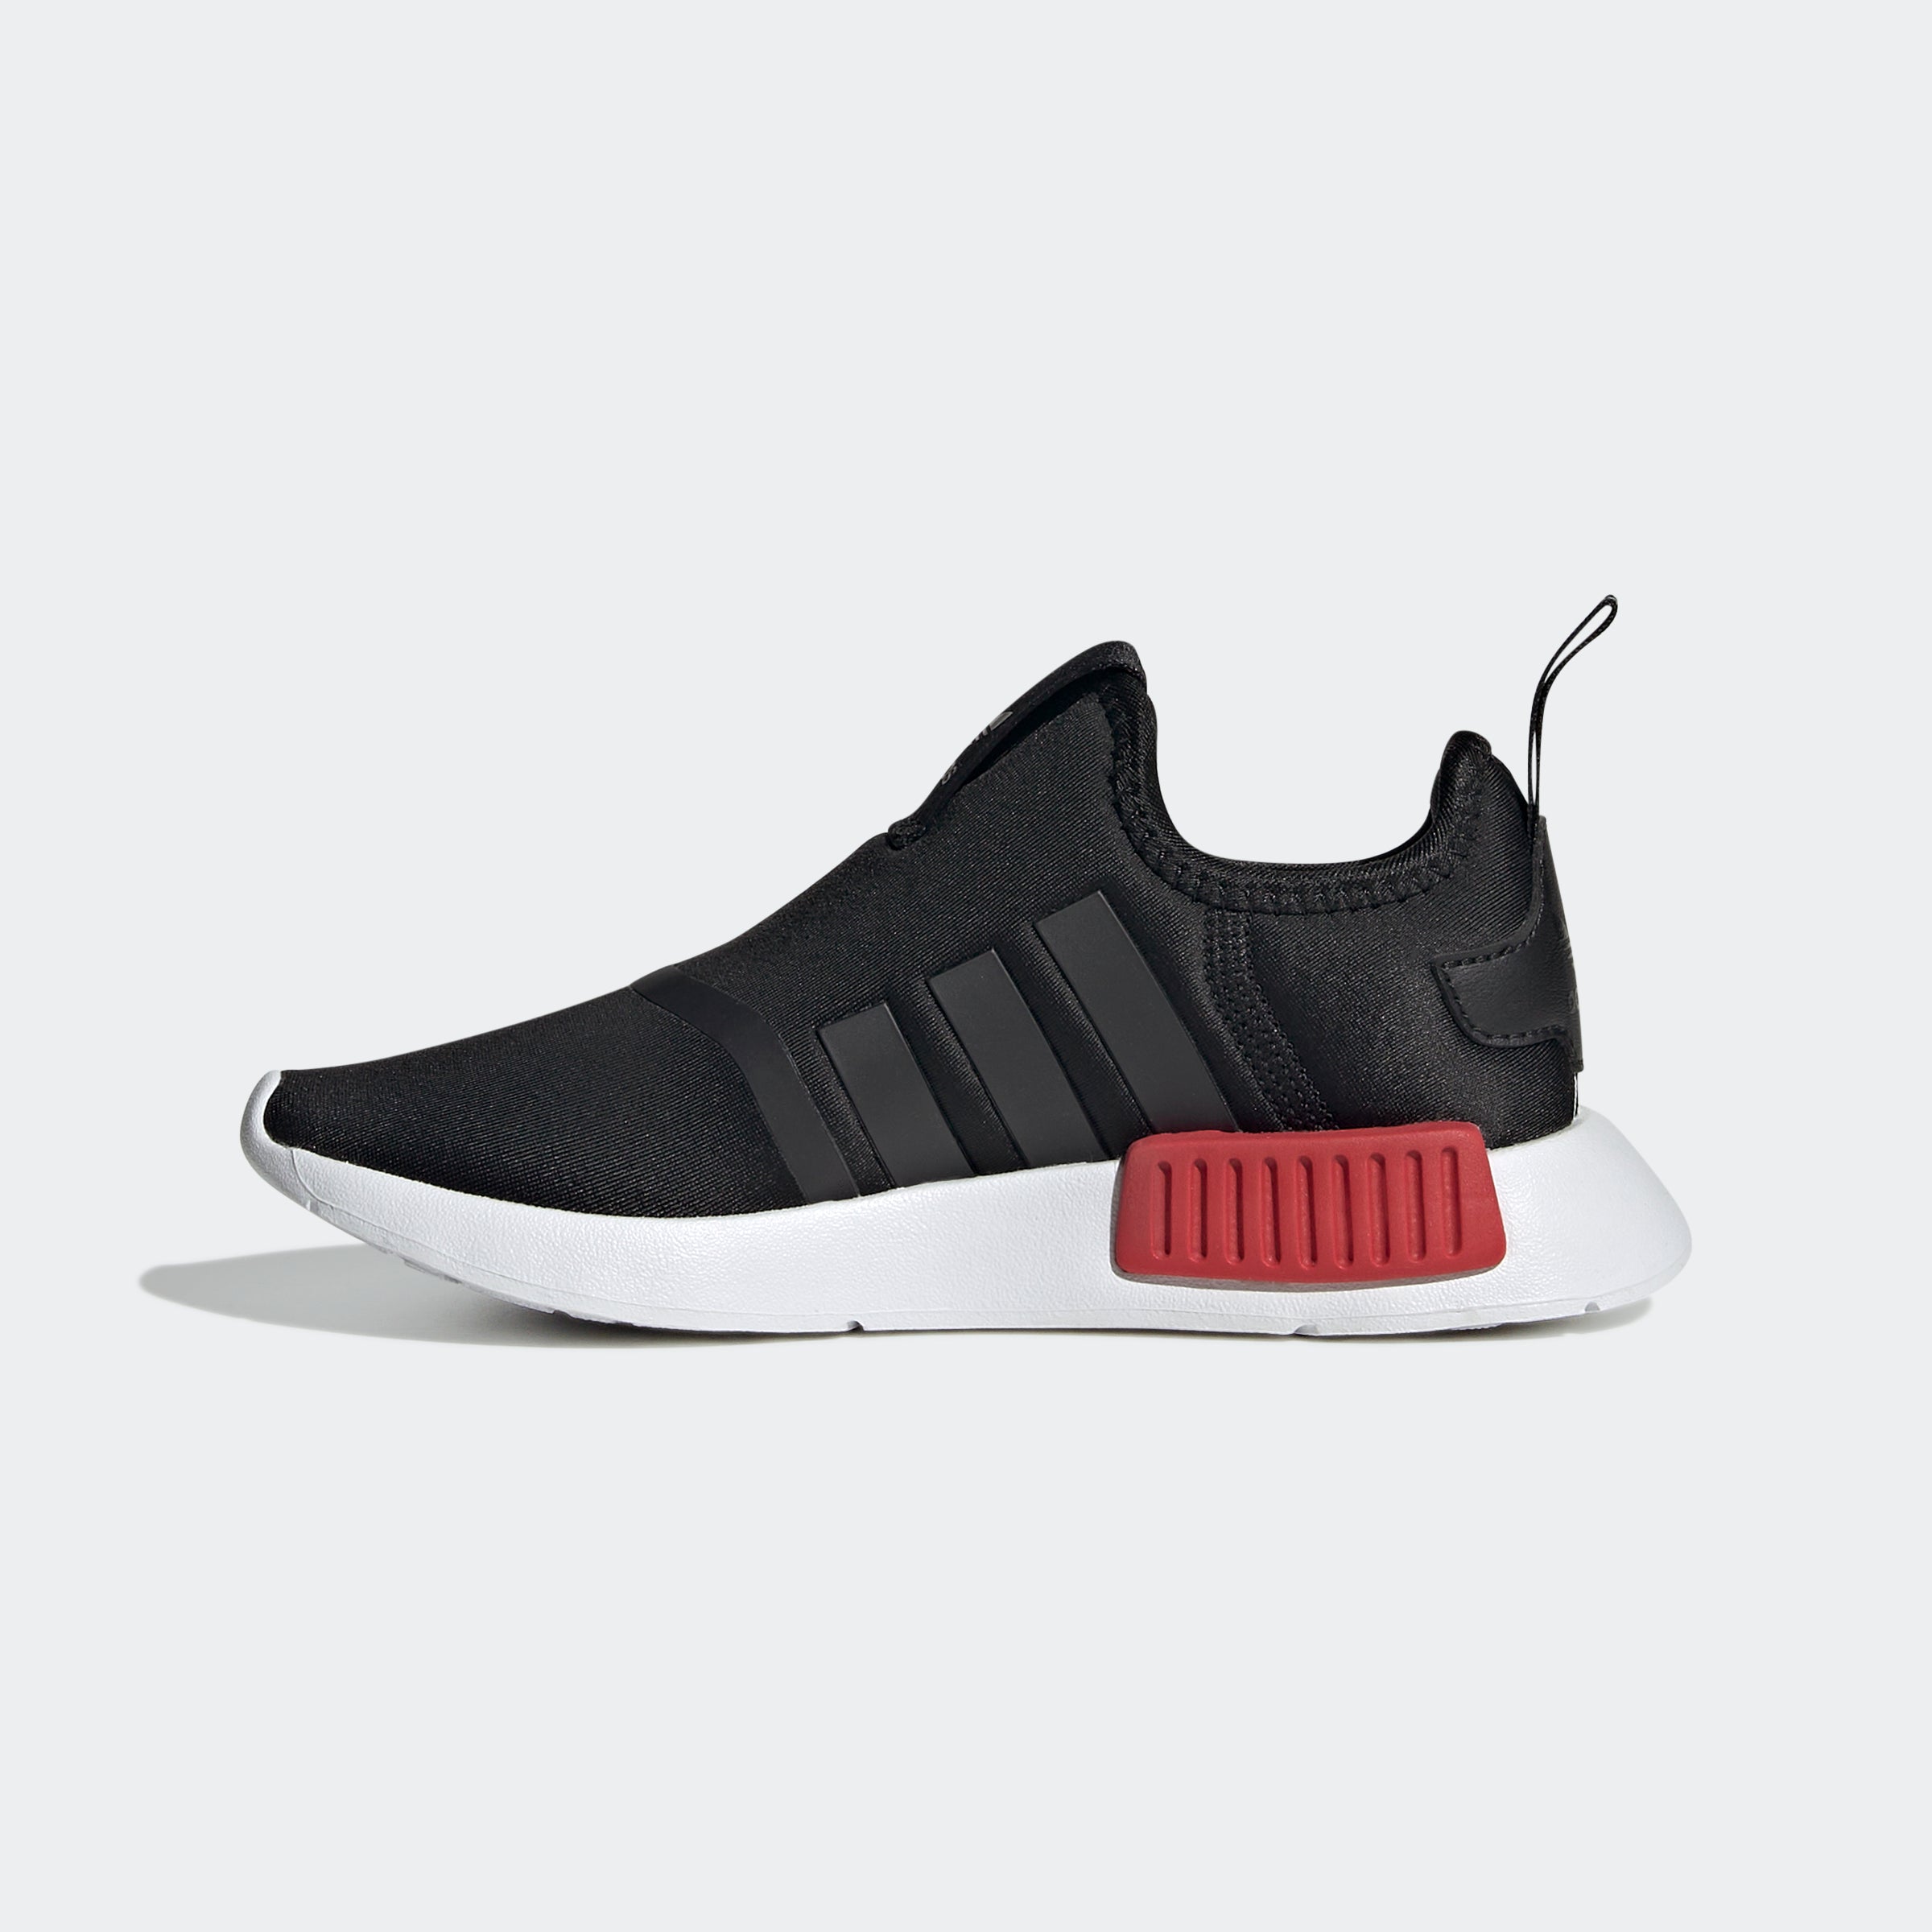 Descanso Inmundo Quien Little Kids adidas NMD 360 Shoes Black GY9147 | Chicago City Sports